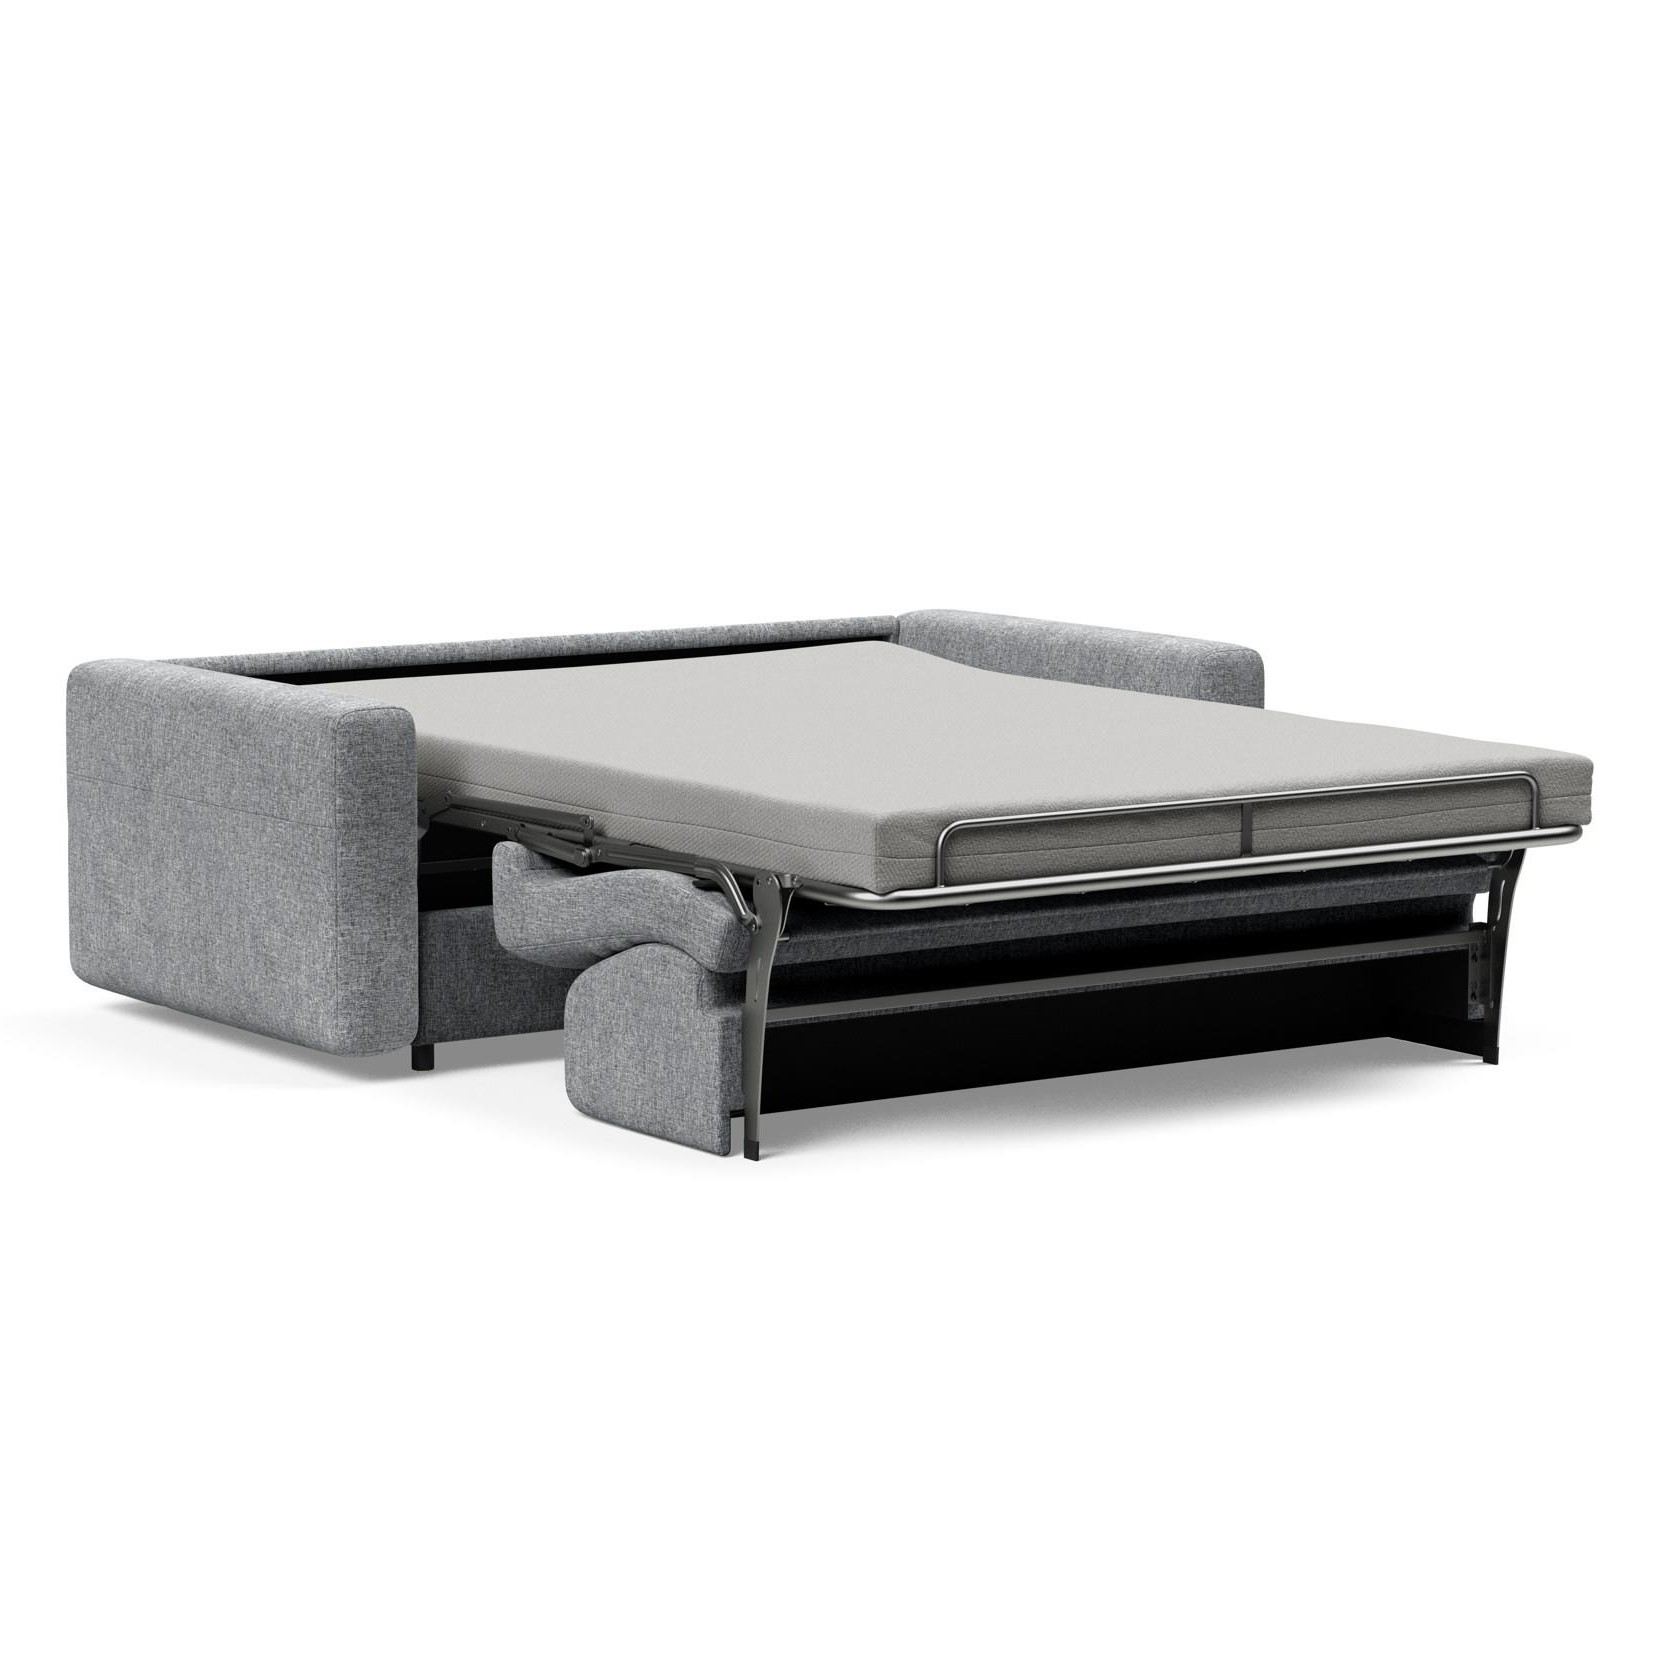 Compact Memory Foam Sofa Bed with USB Charging Ports